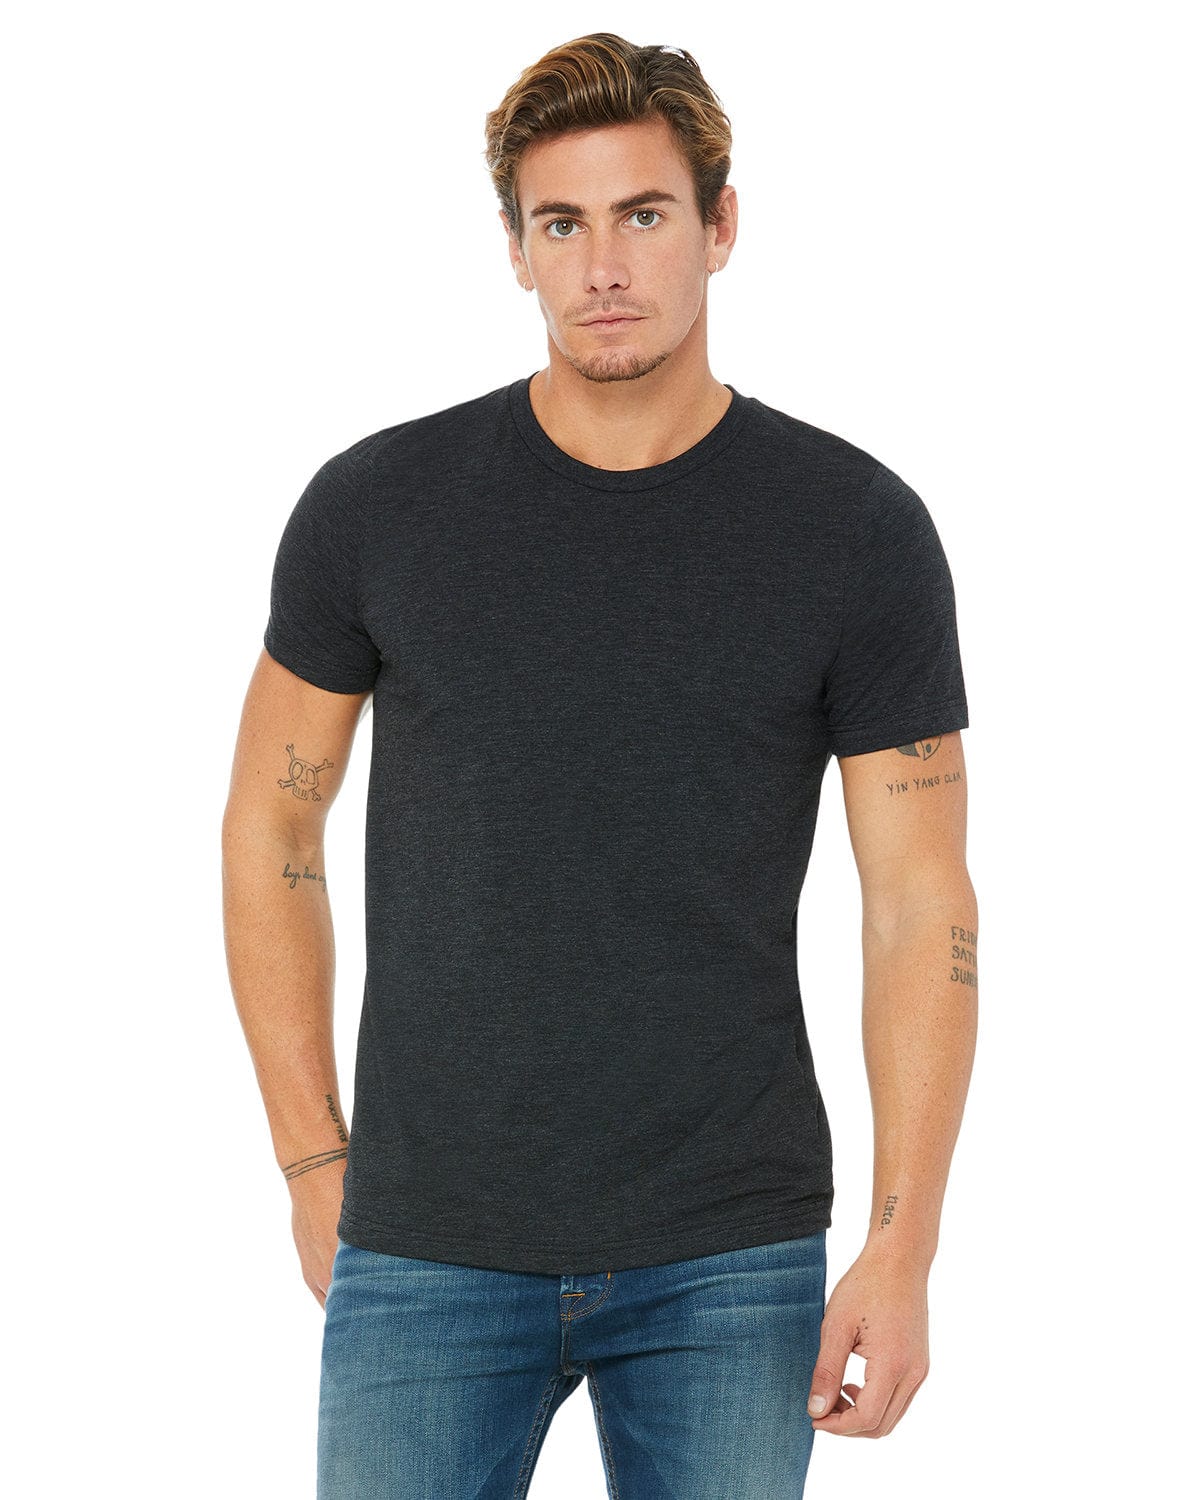 Men's Triblend T-Shirt - The most comfortable custom printed tee available